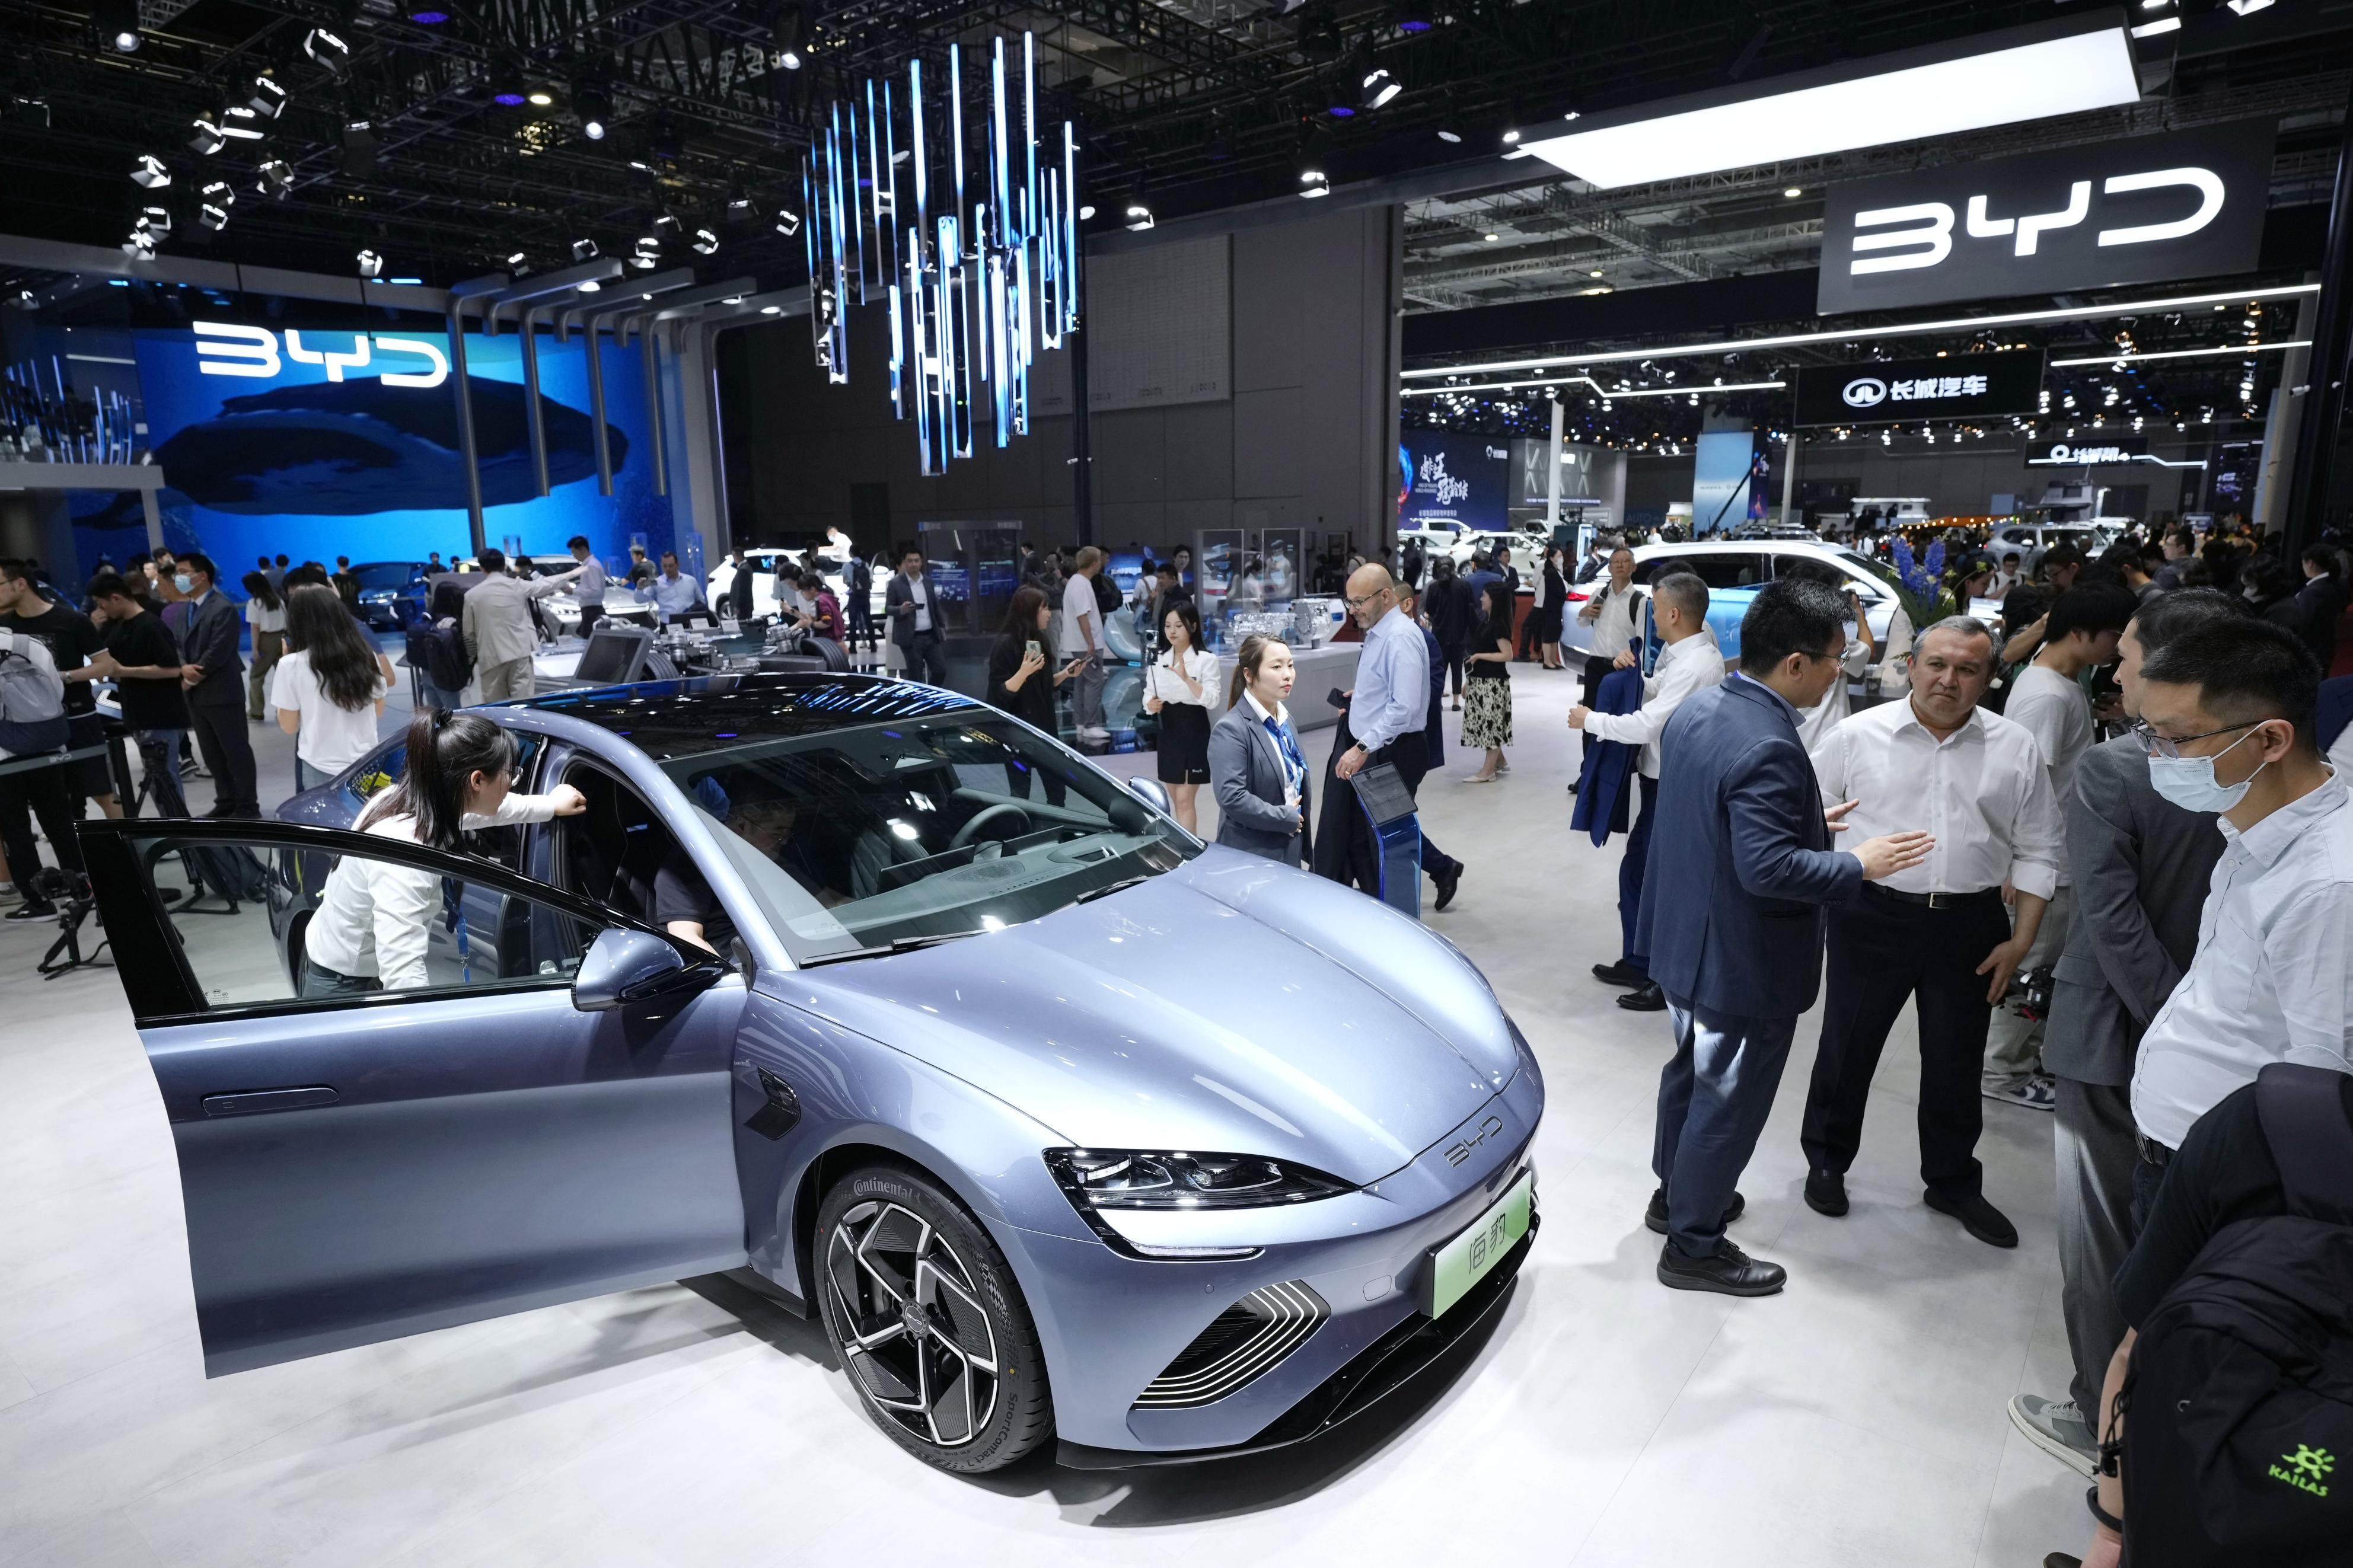 People gathering near the BYD booth at Shanghai motor show in April 2023. Photo: Kyodo